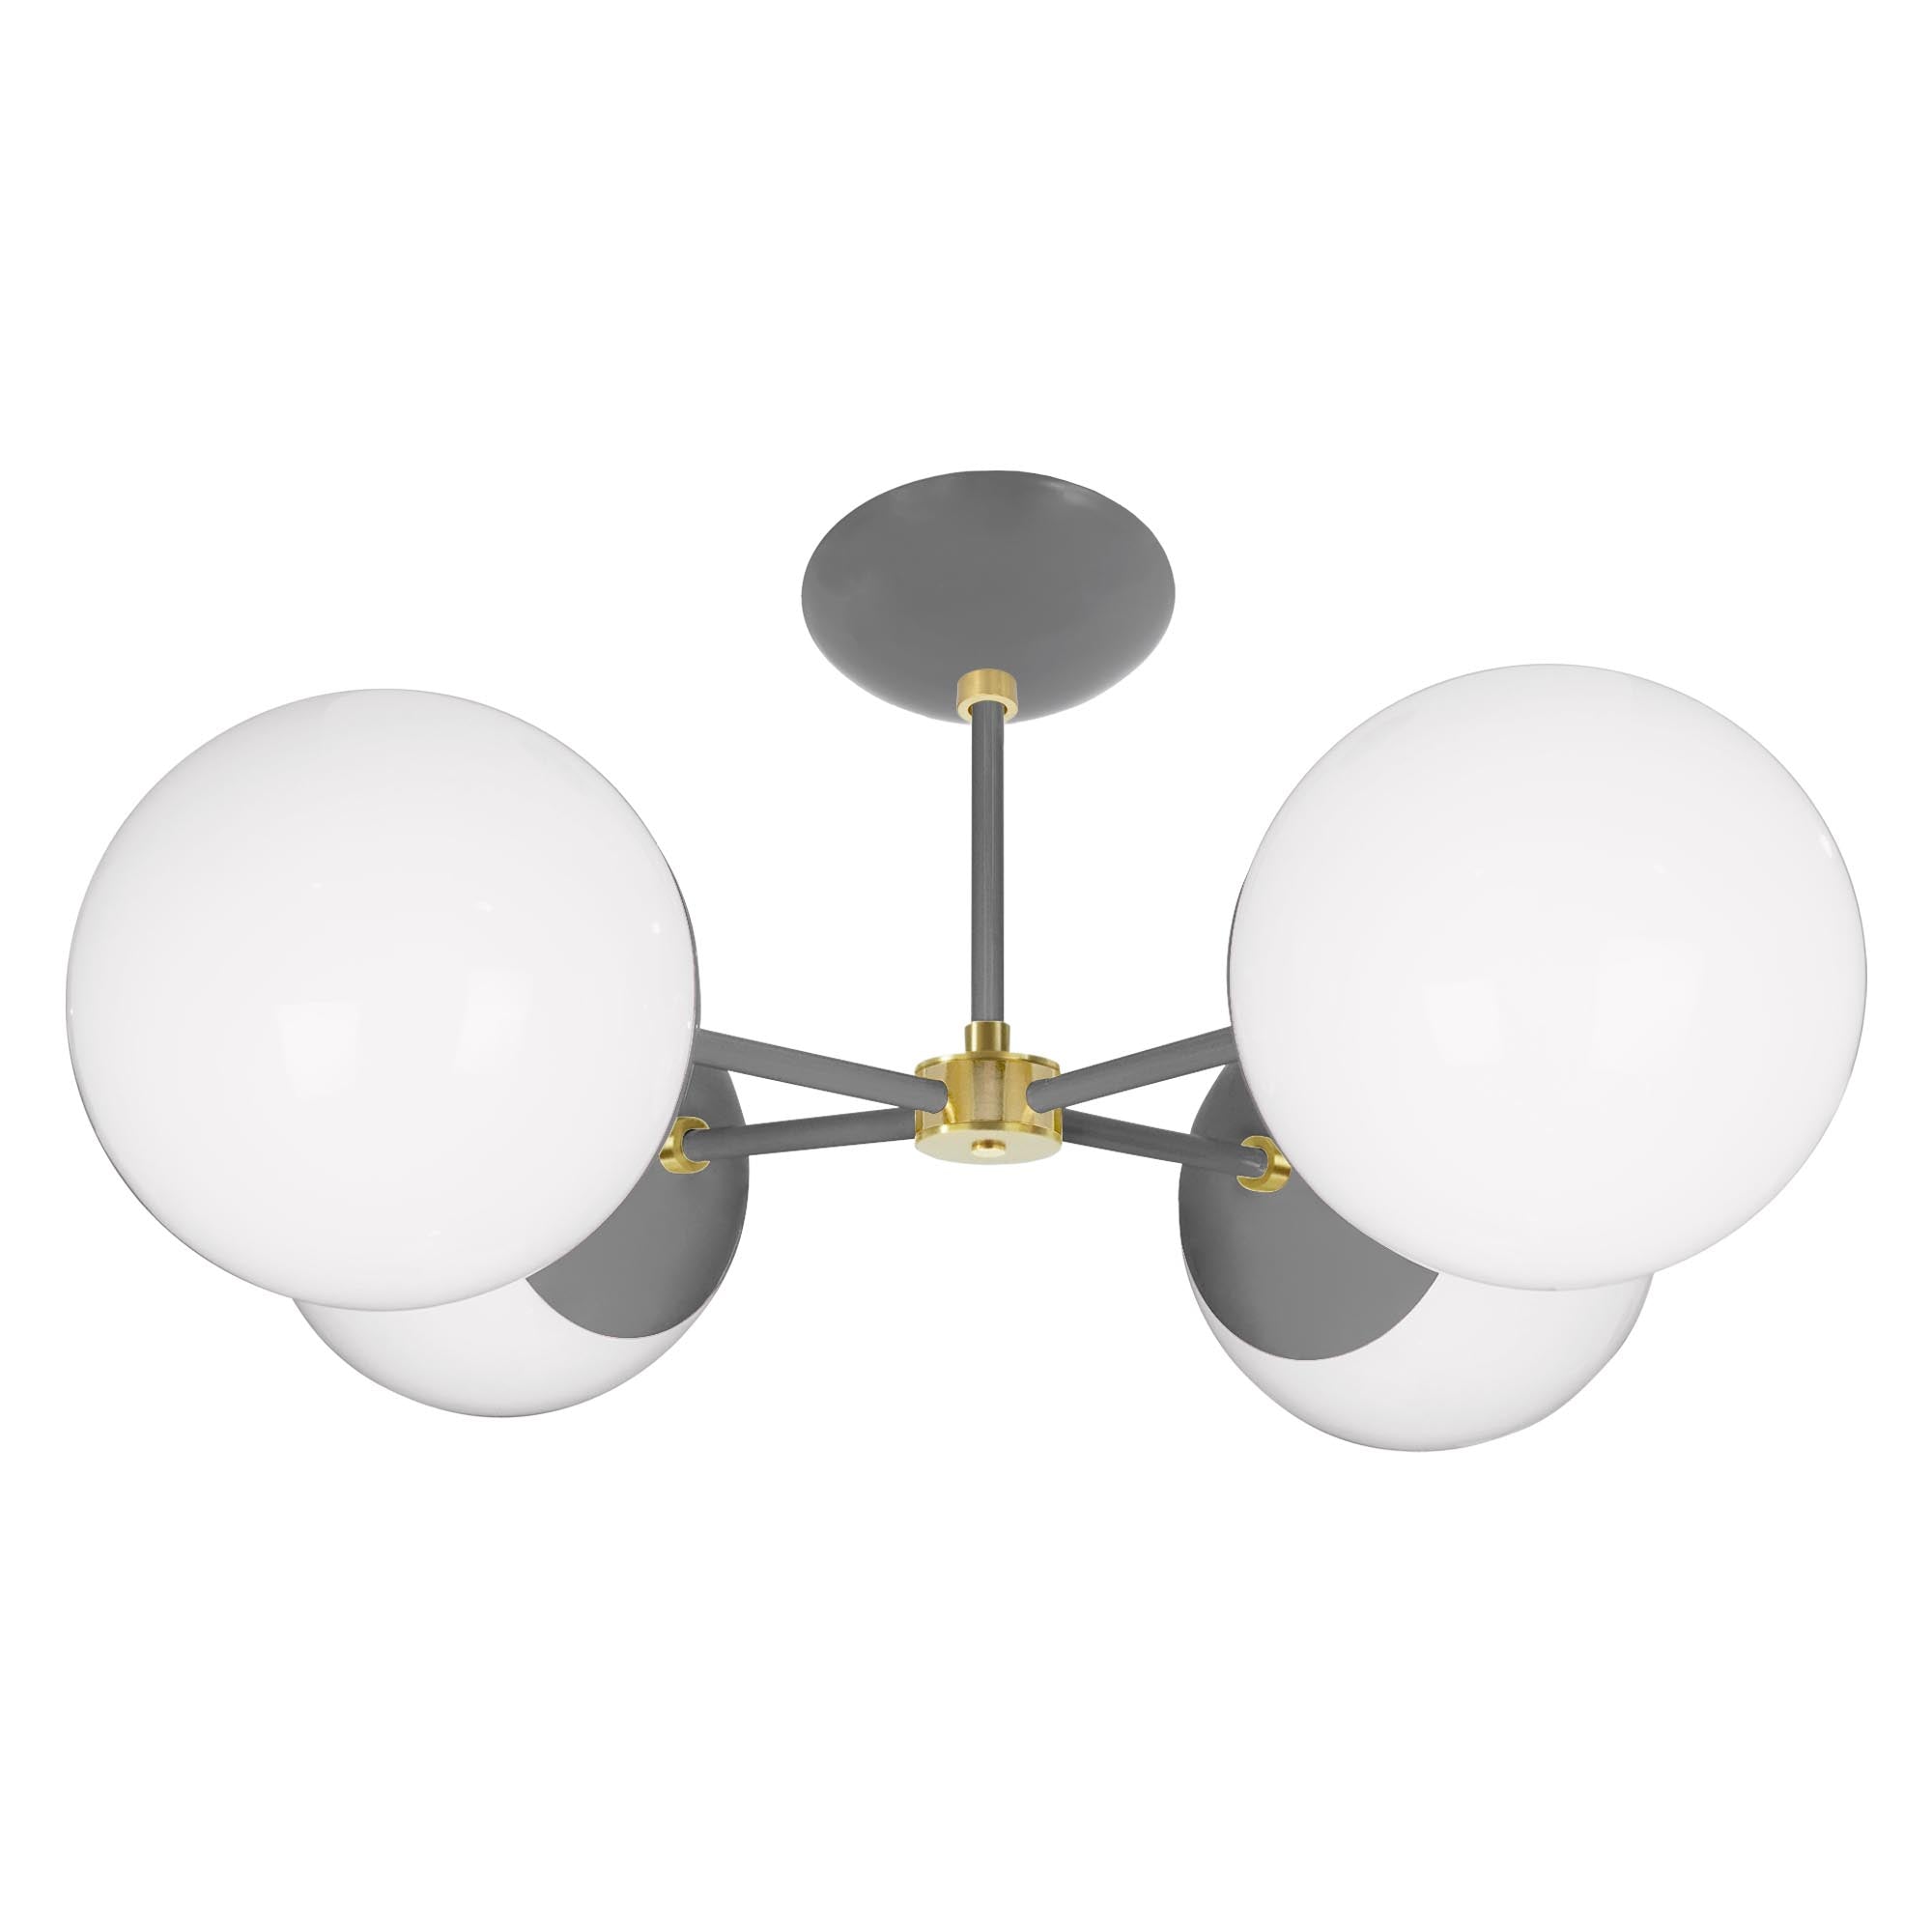 Brass and charcoal color Big Orbi flush mount Dutton Brown lighting